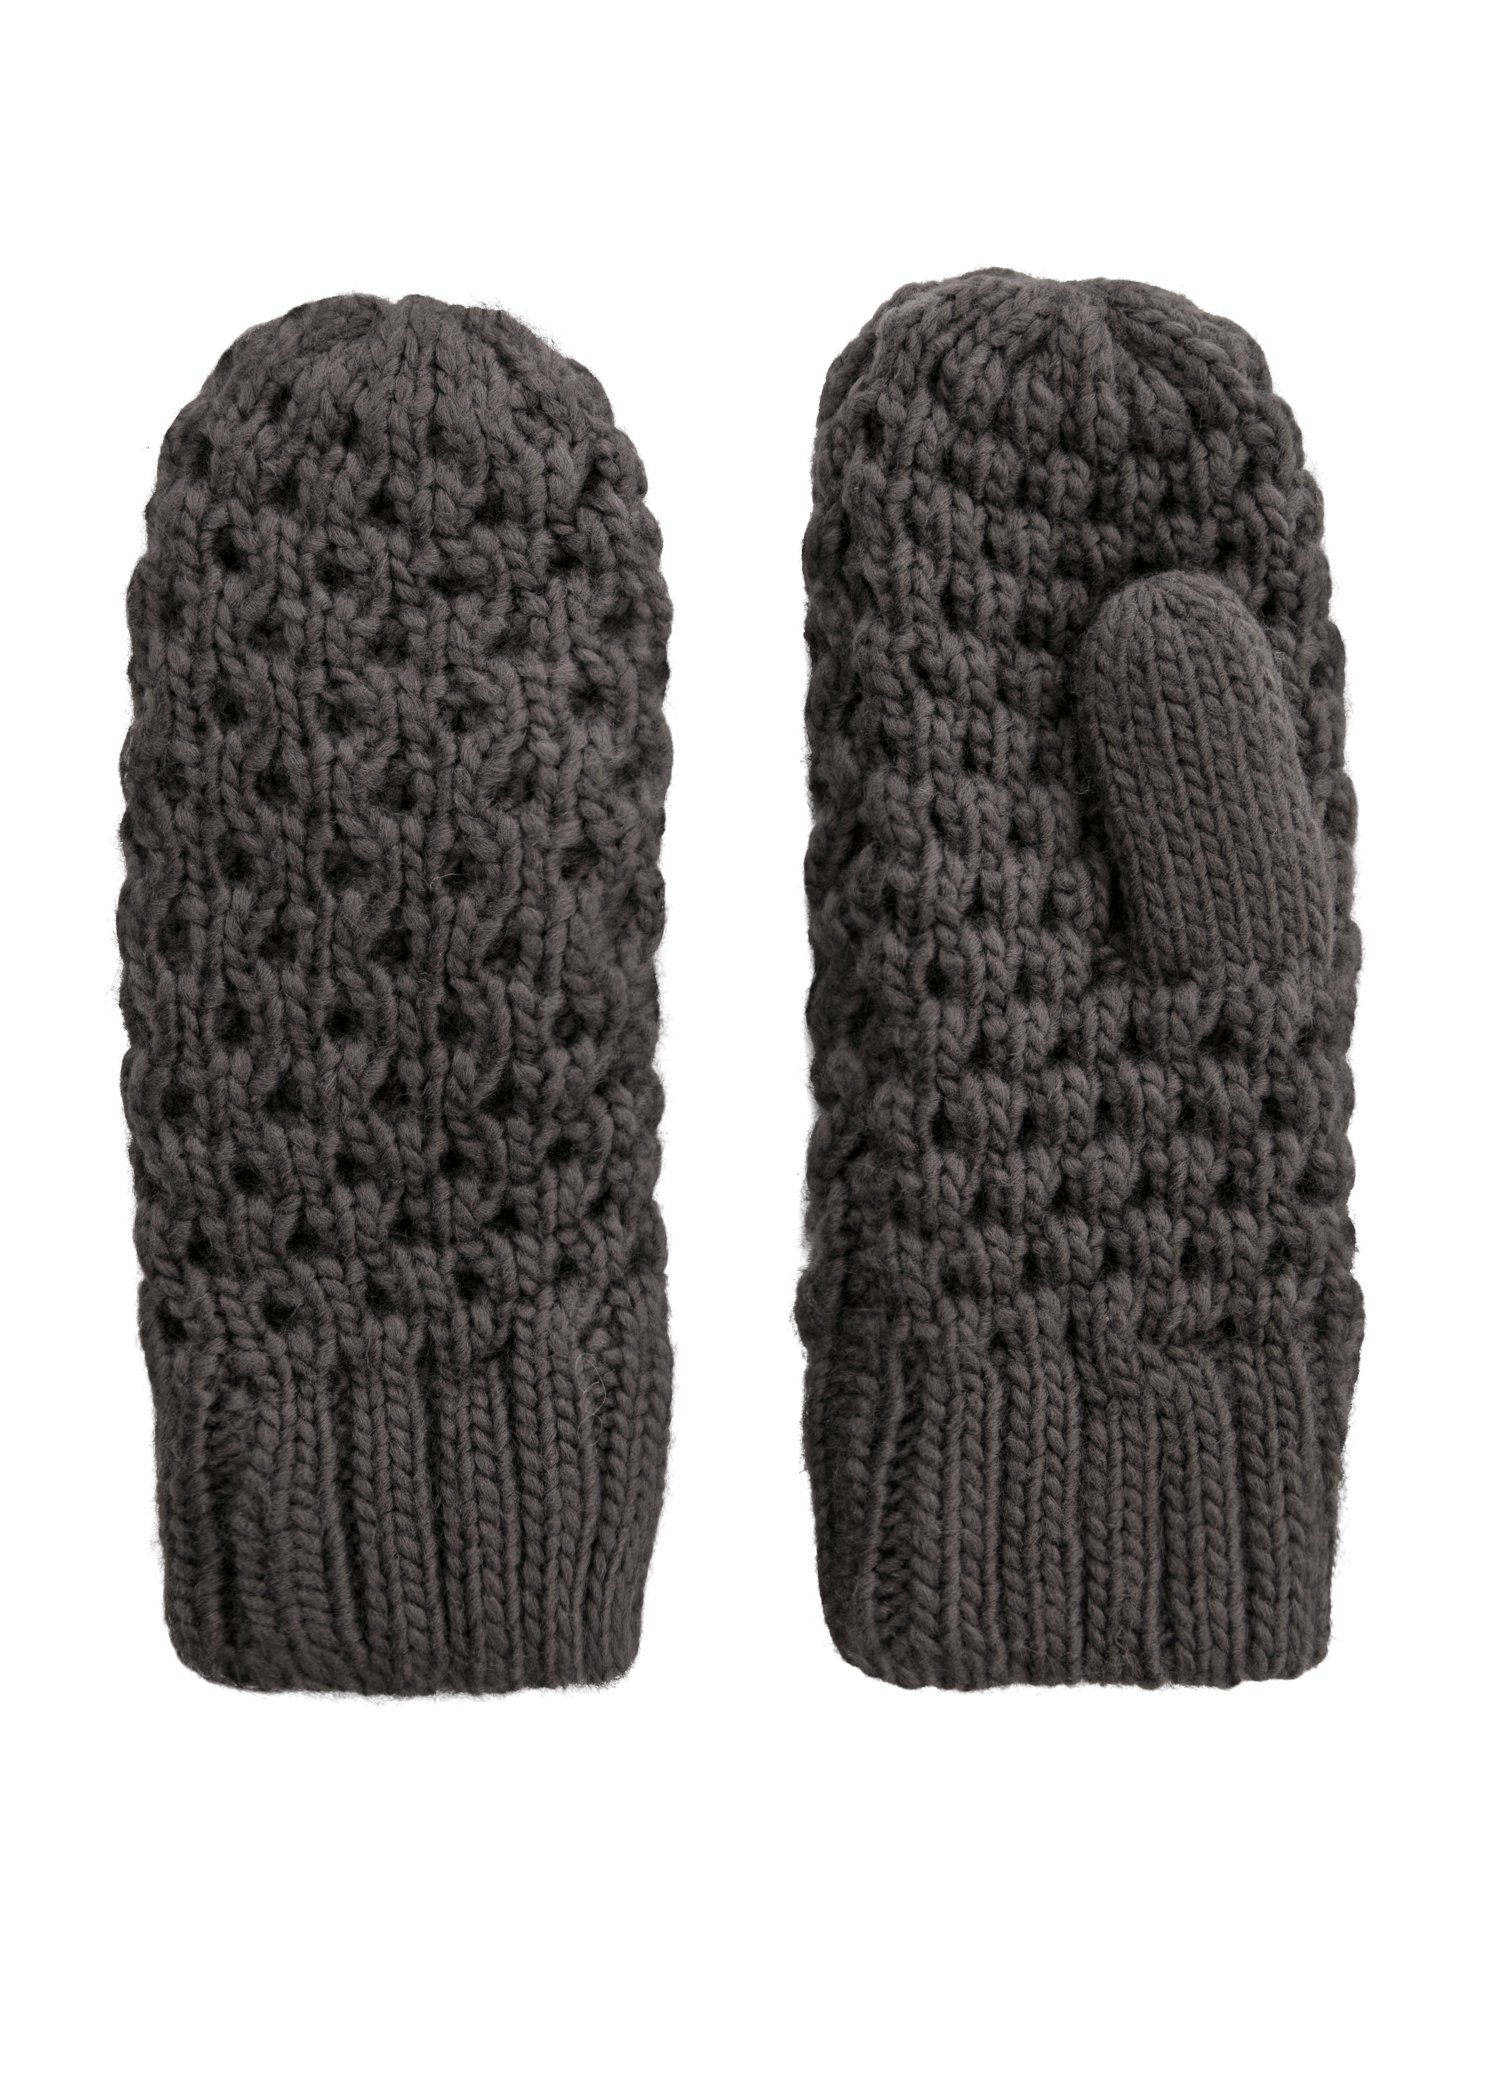 Knitted Gloves Image 1